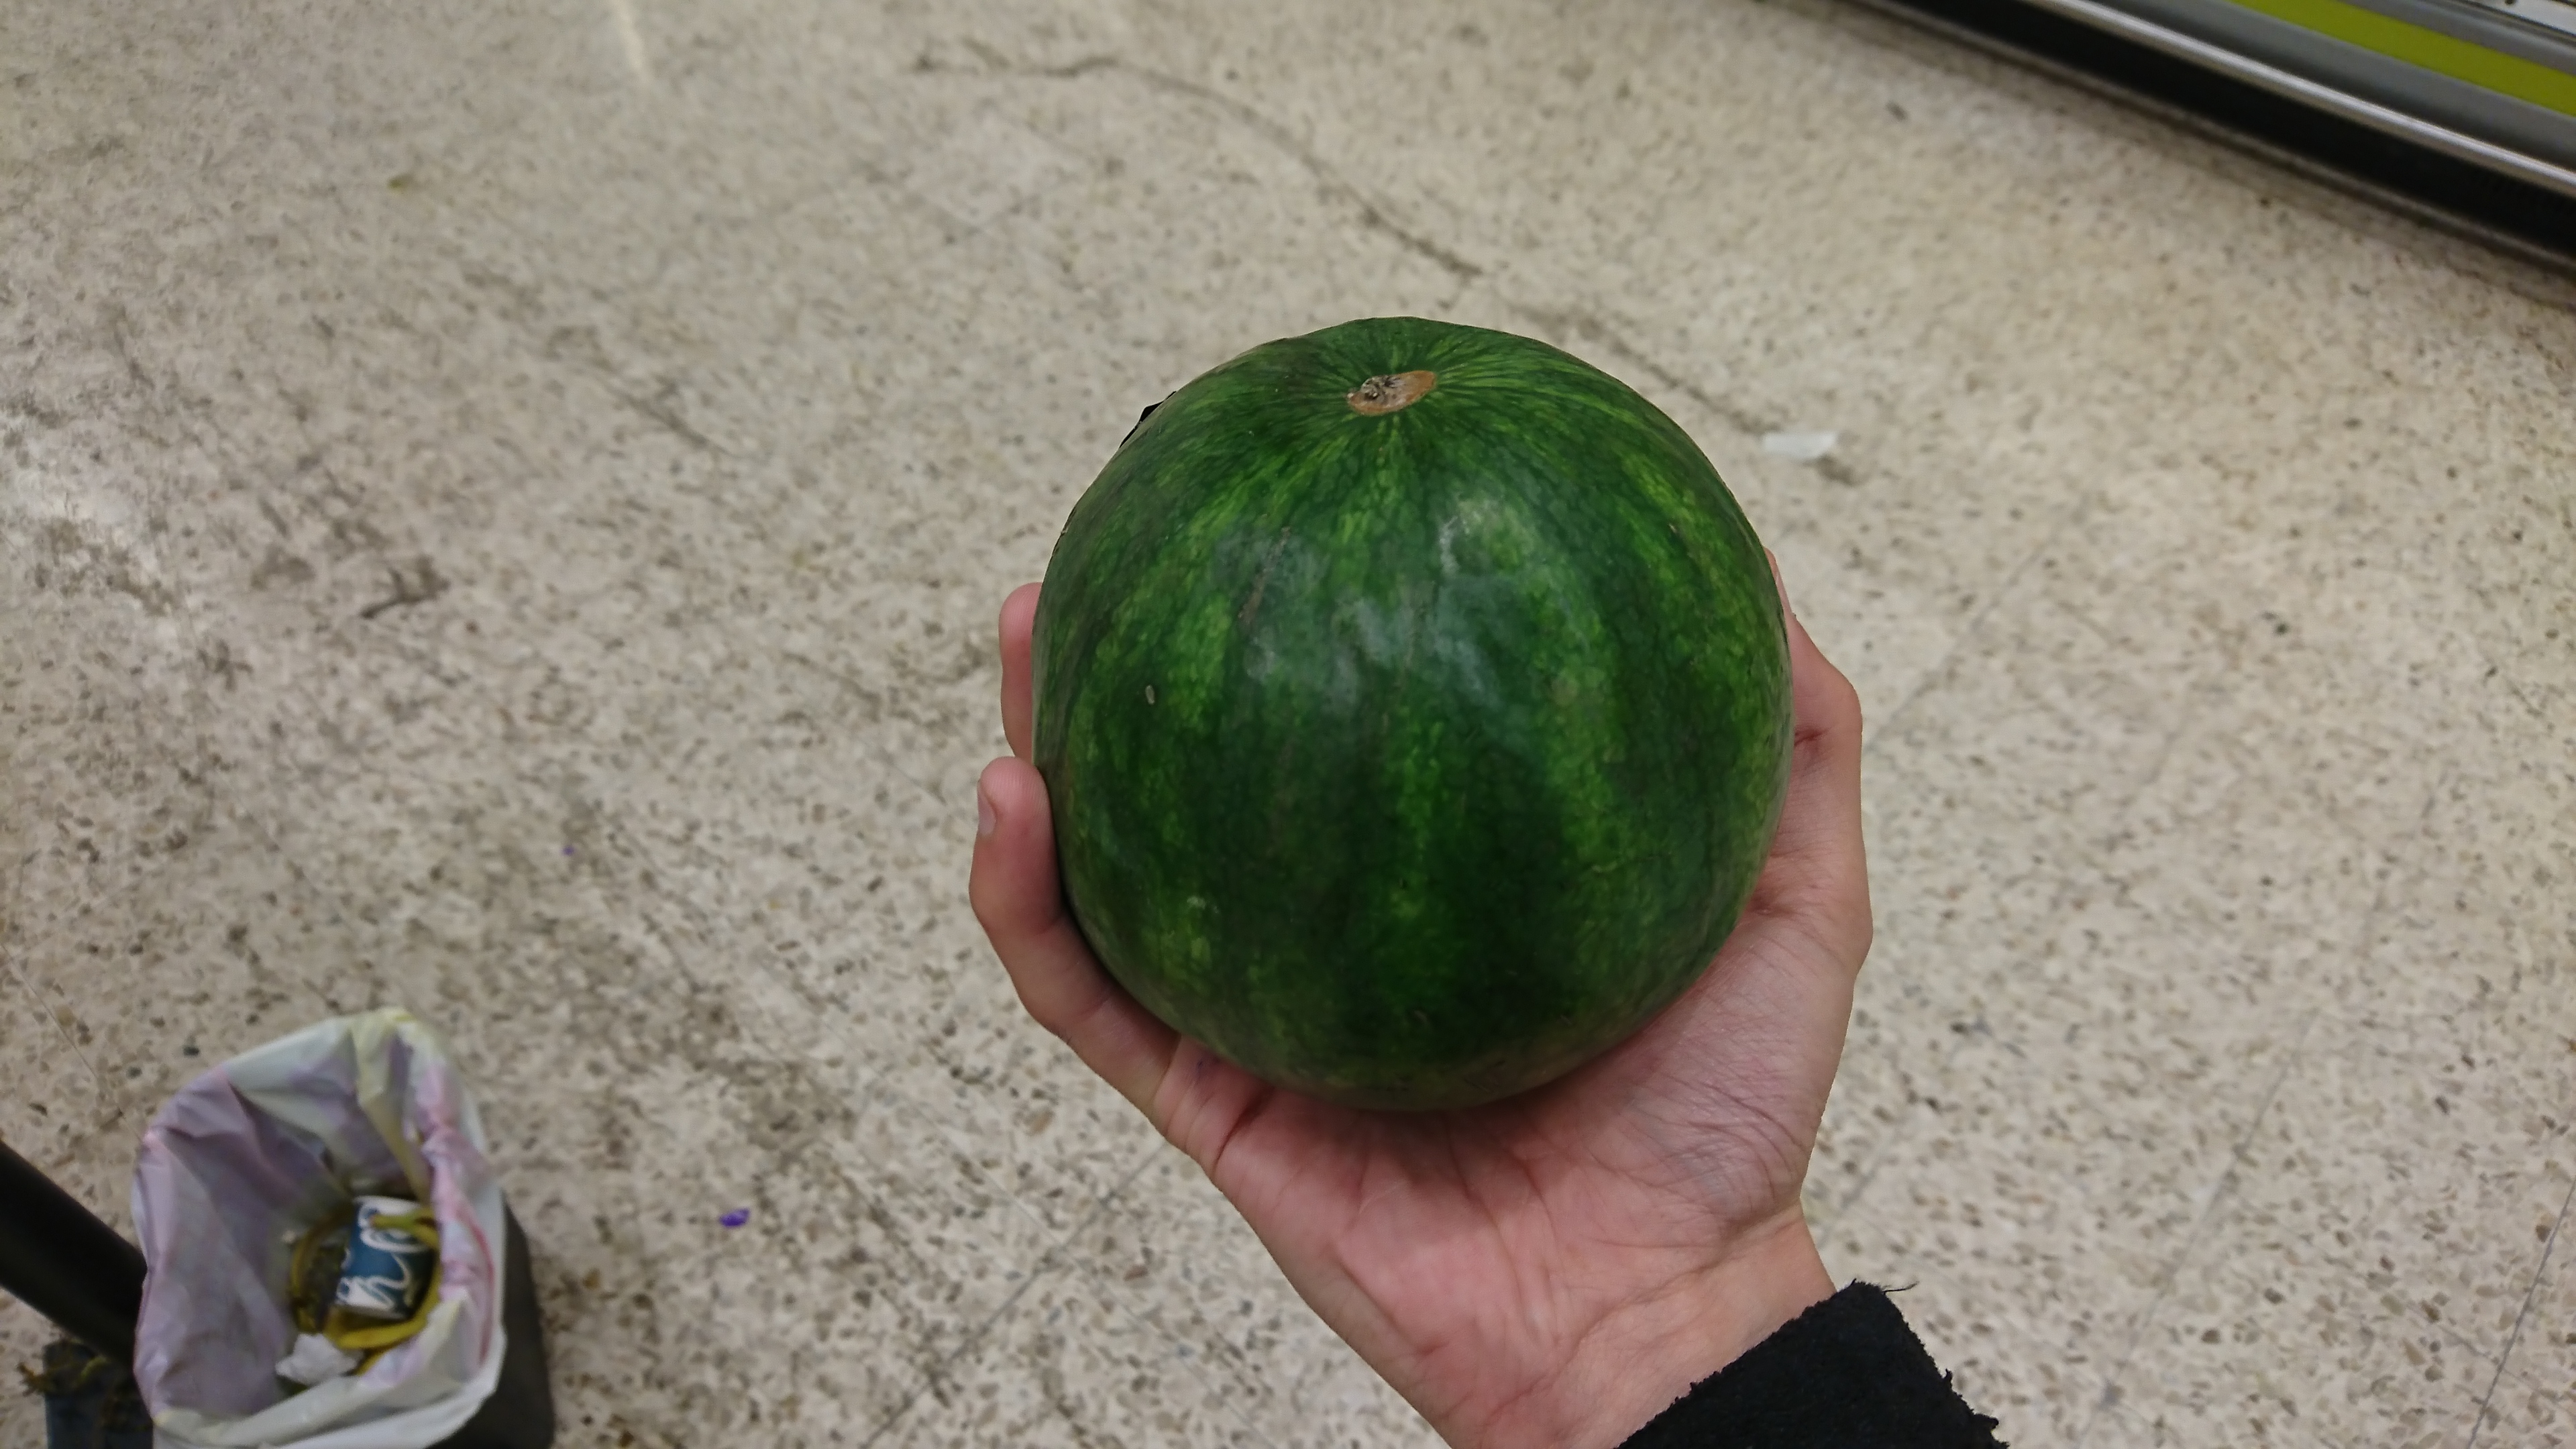 Some guy found this small watermelon at a supermarket and thought it was pretty neat, so he posted it online and "got a whooping 5 points!"